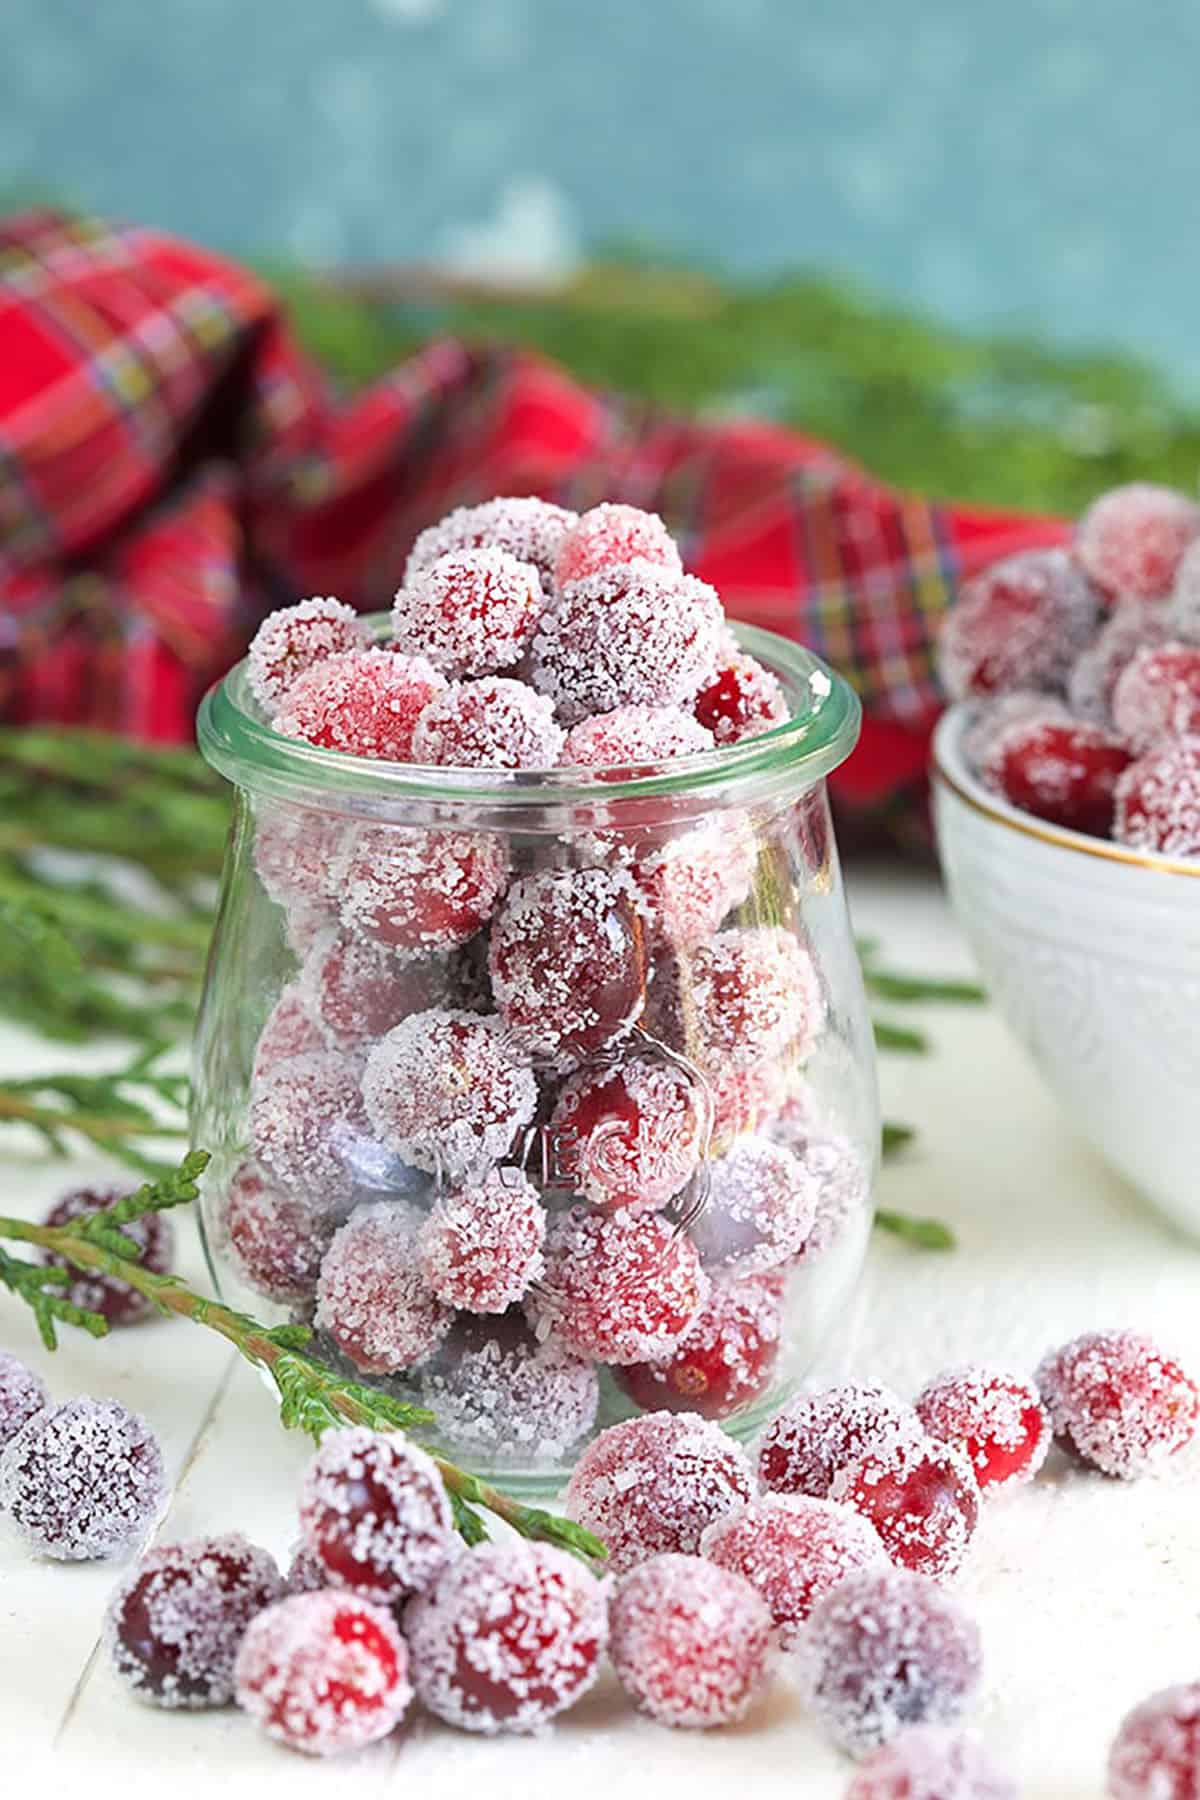 Sugared cranberries in a weck tulip jar with a blue background.